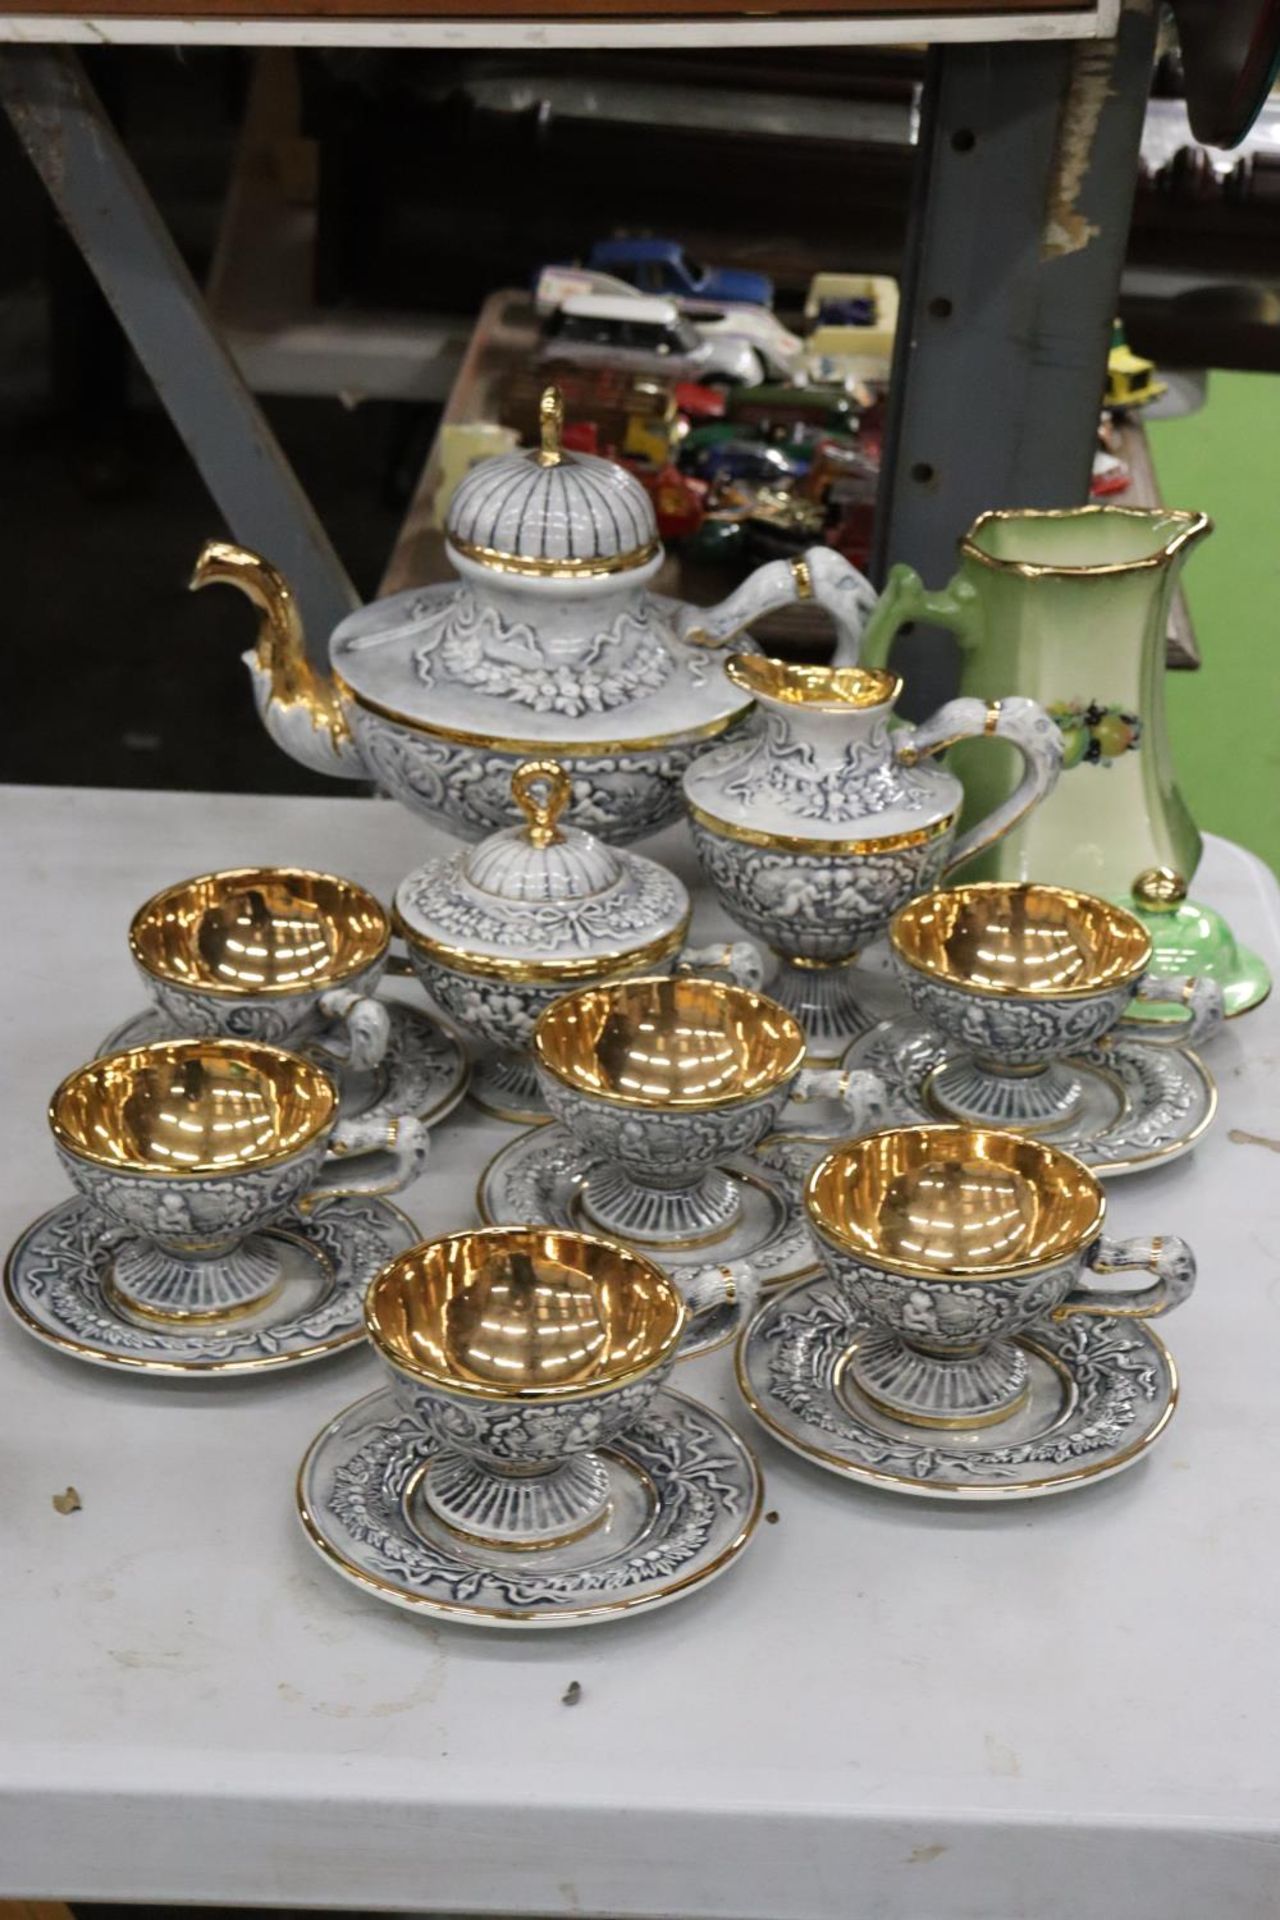 A R.CAPODIMONTE COFFEE SERVICE TO INCLUDE SIX CUPS AND SAUCERS, LARGE COFFEE POT, JUG AND SUGAR BOWL